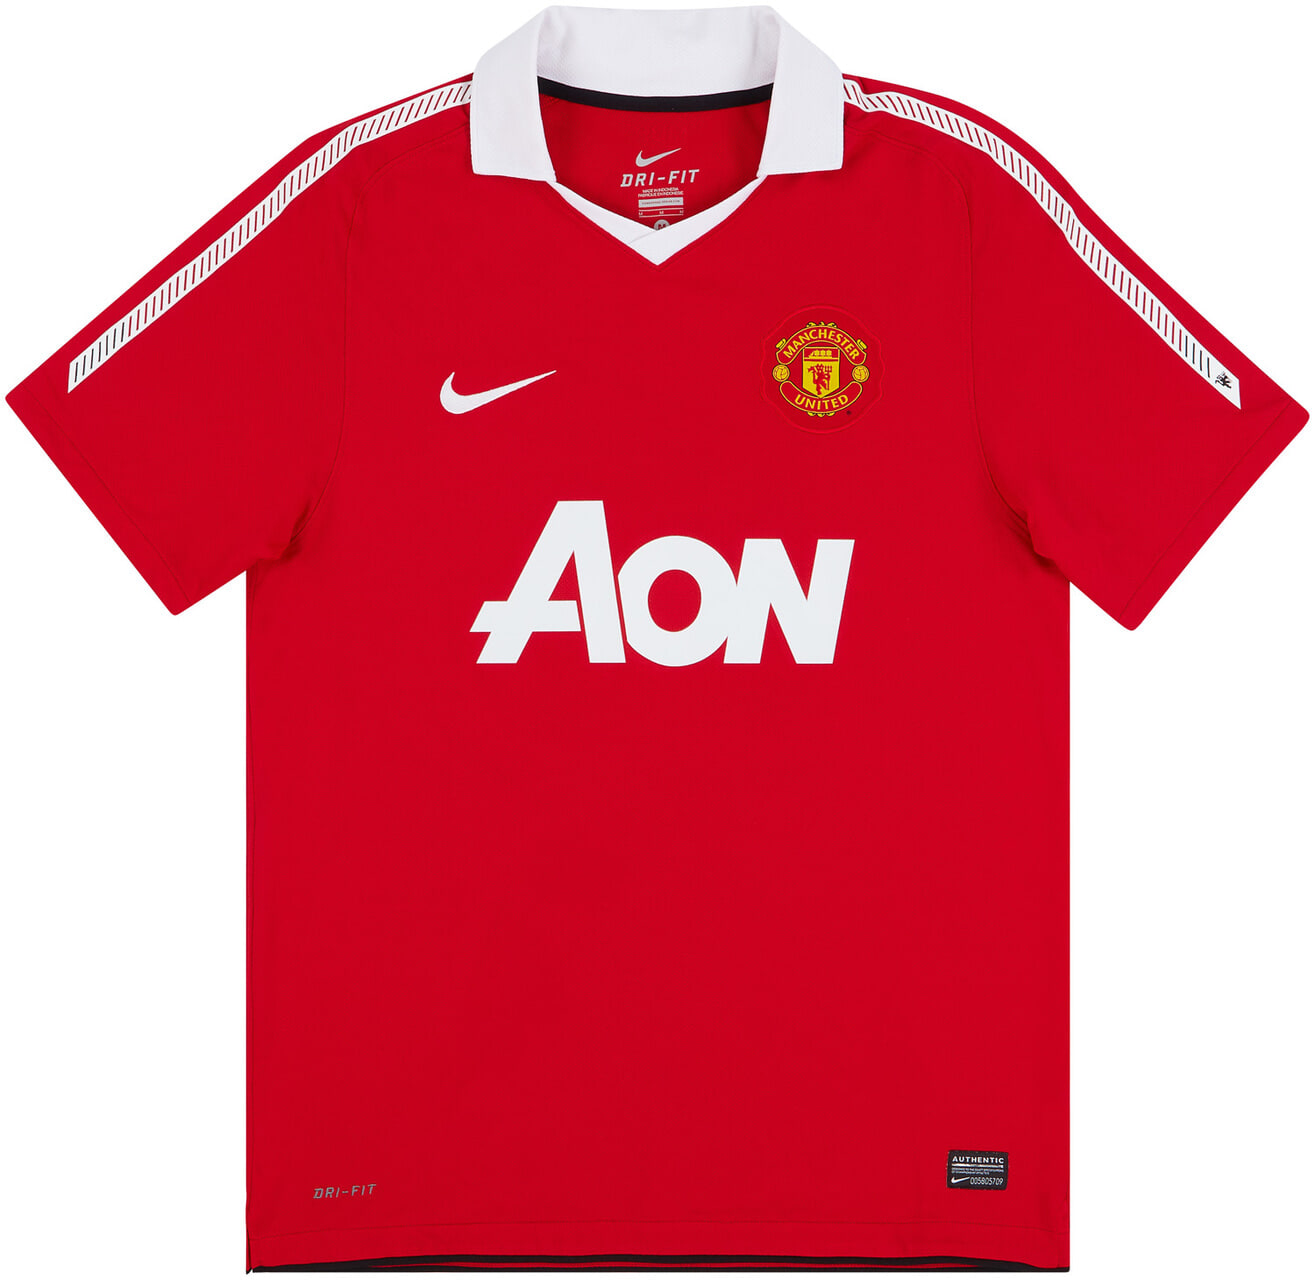 2010-11 Manchester United Home Shirt - 8/10 -